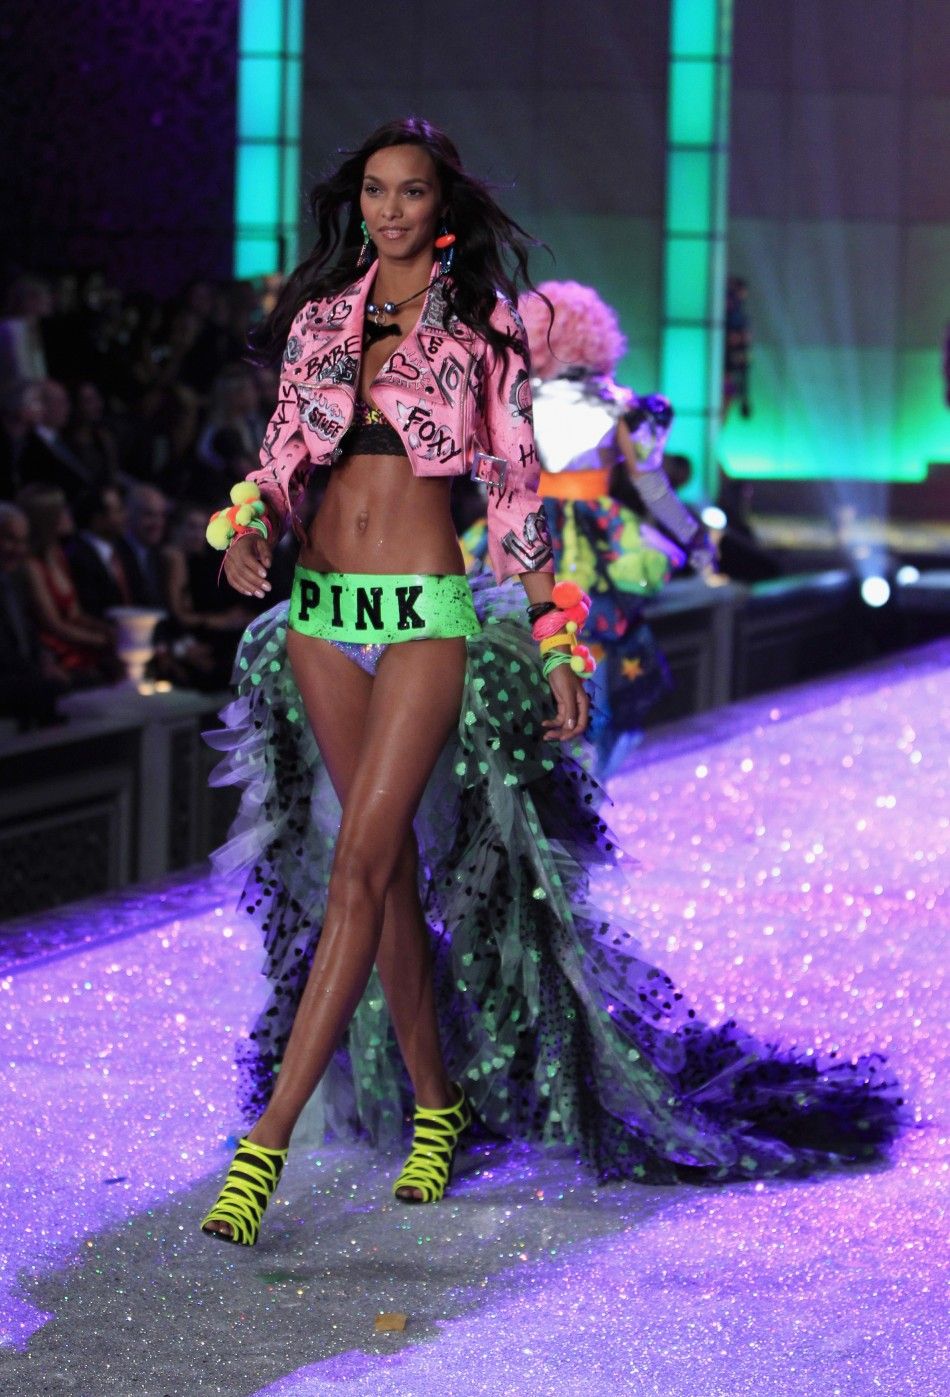  A Victorias Secret model presents a creation during the Victorias Secret Fashion Show in New York